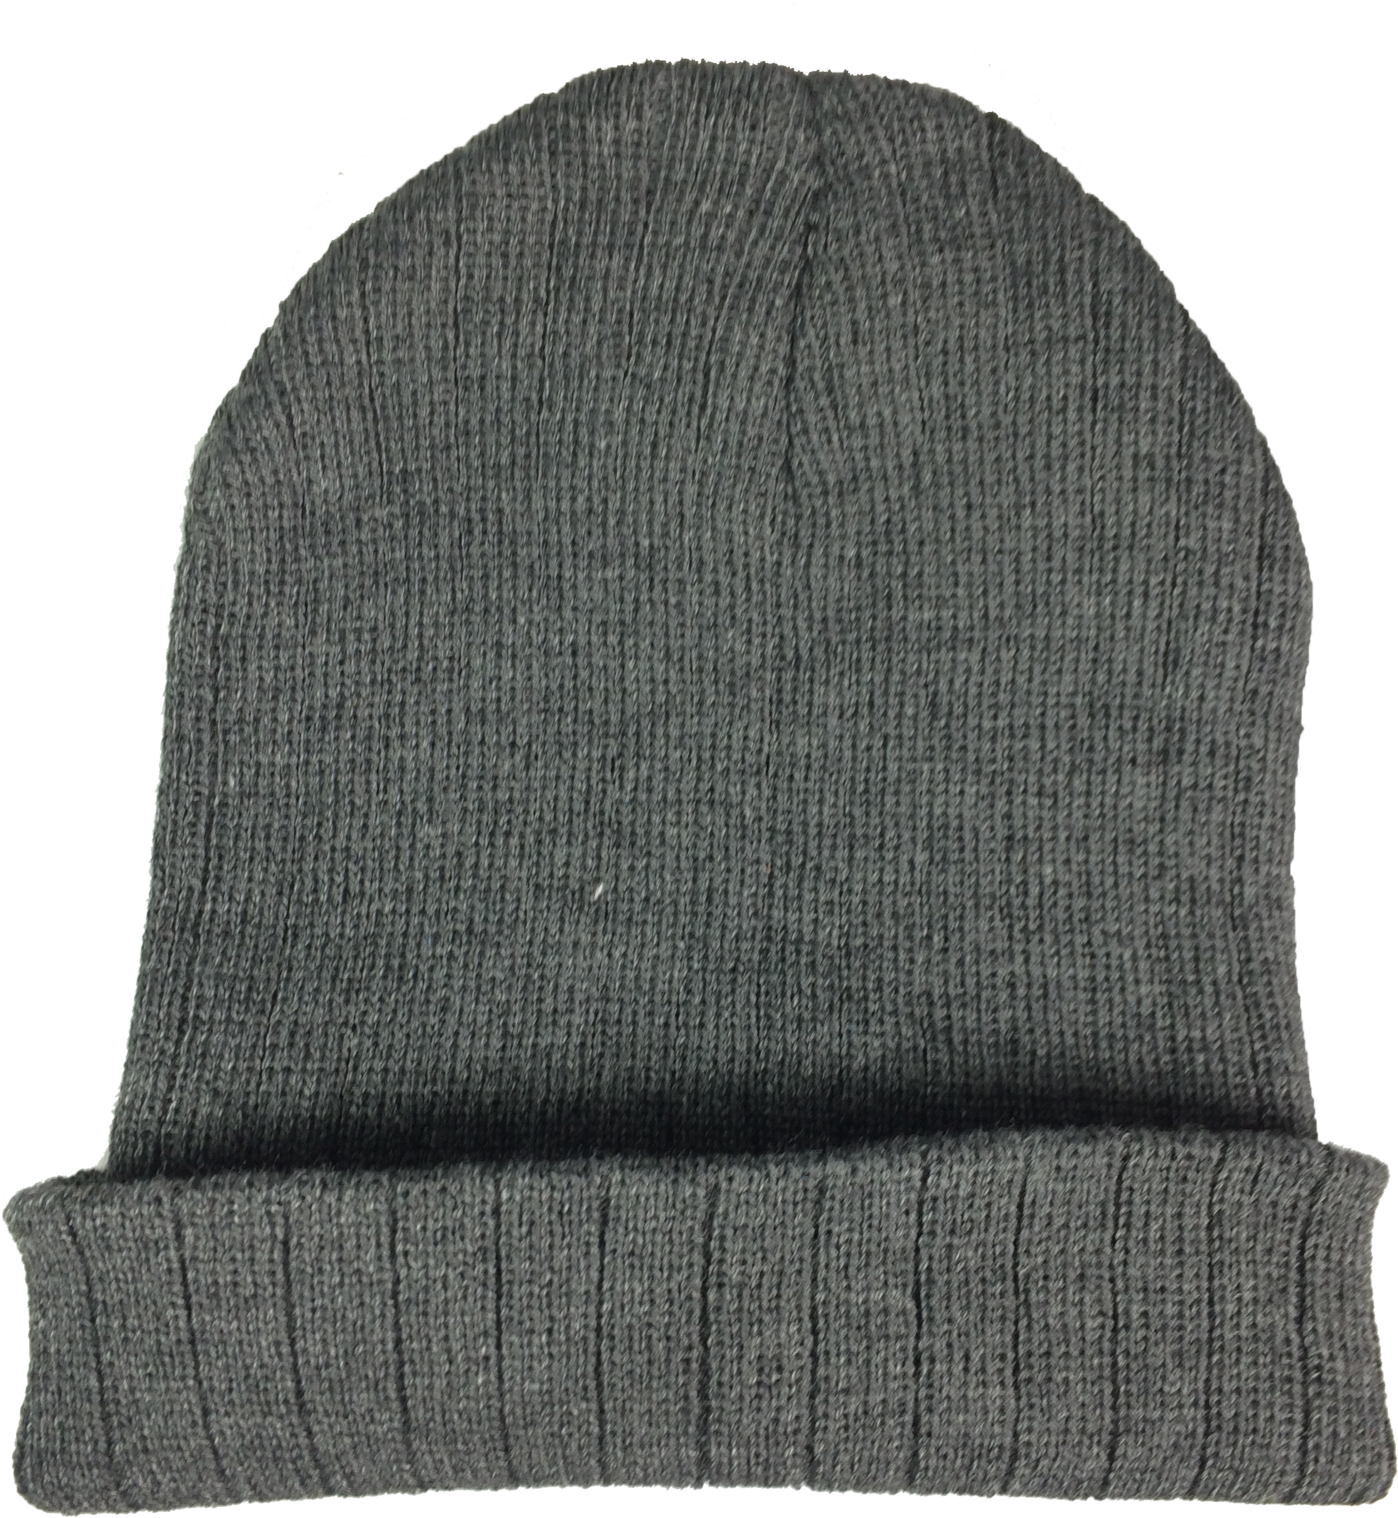 Gray Knit Beanie Hat PNG